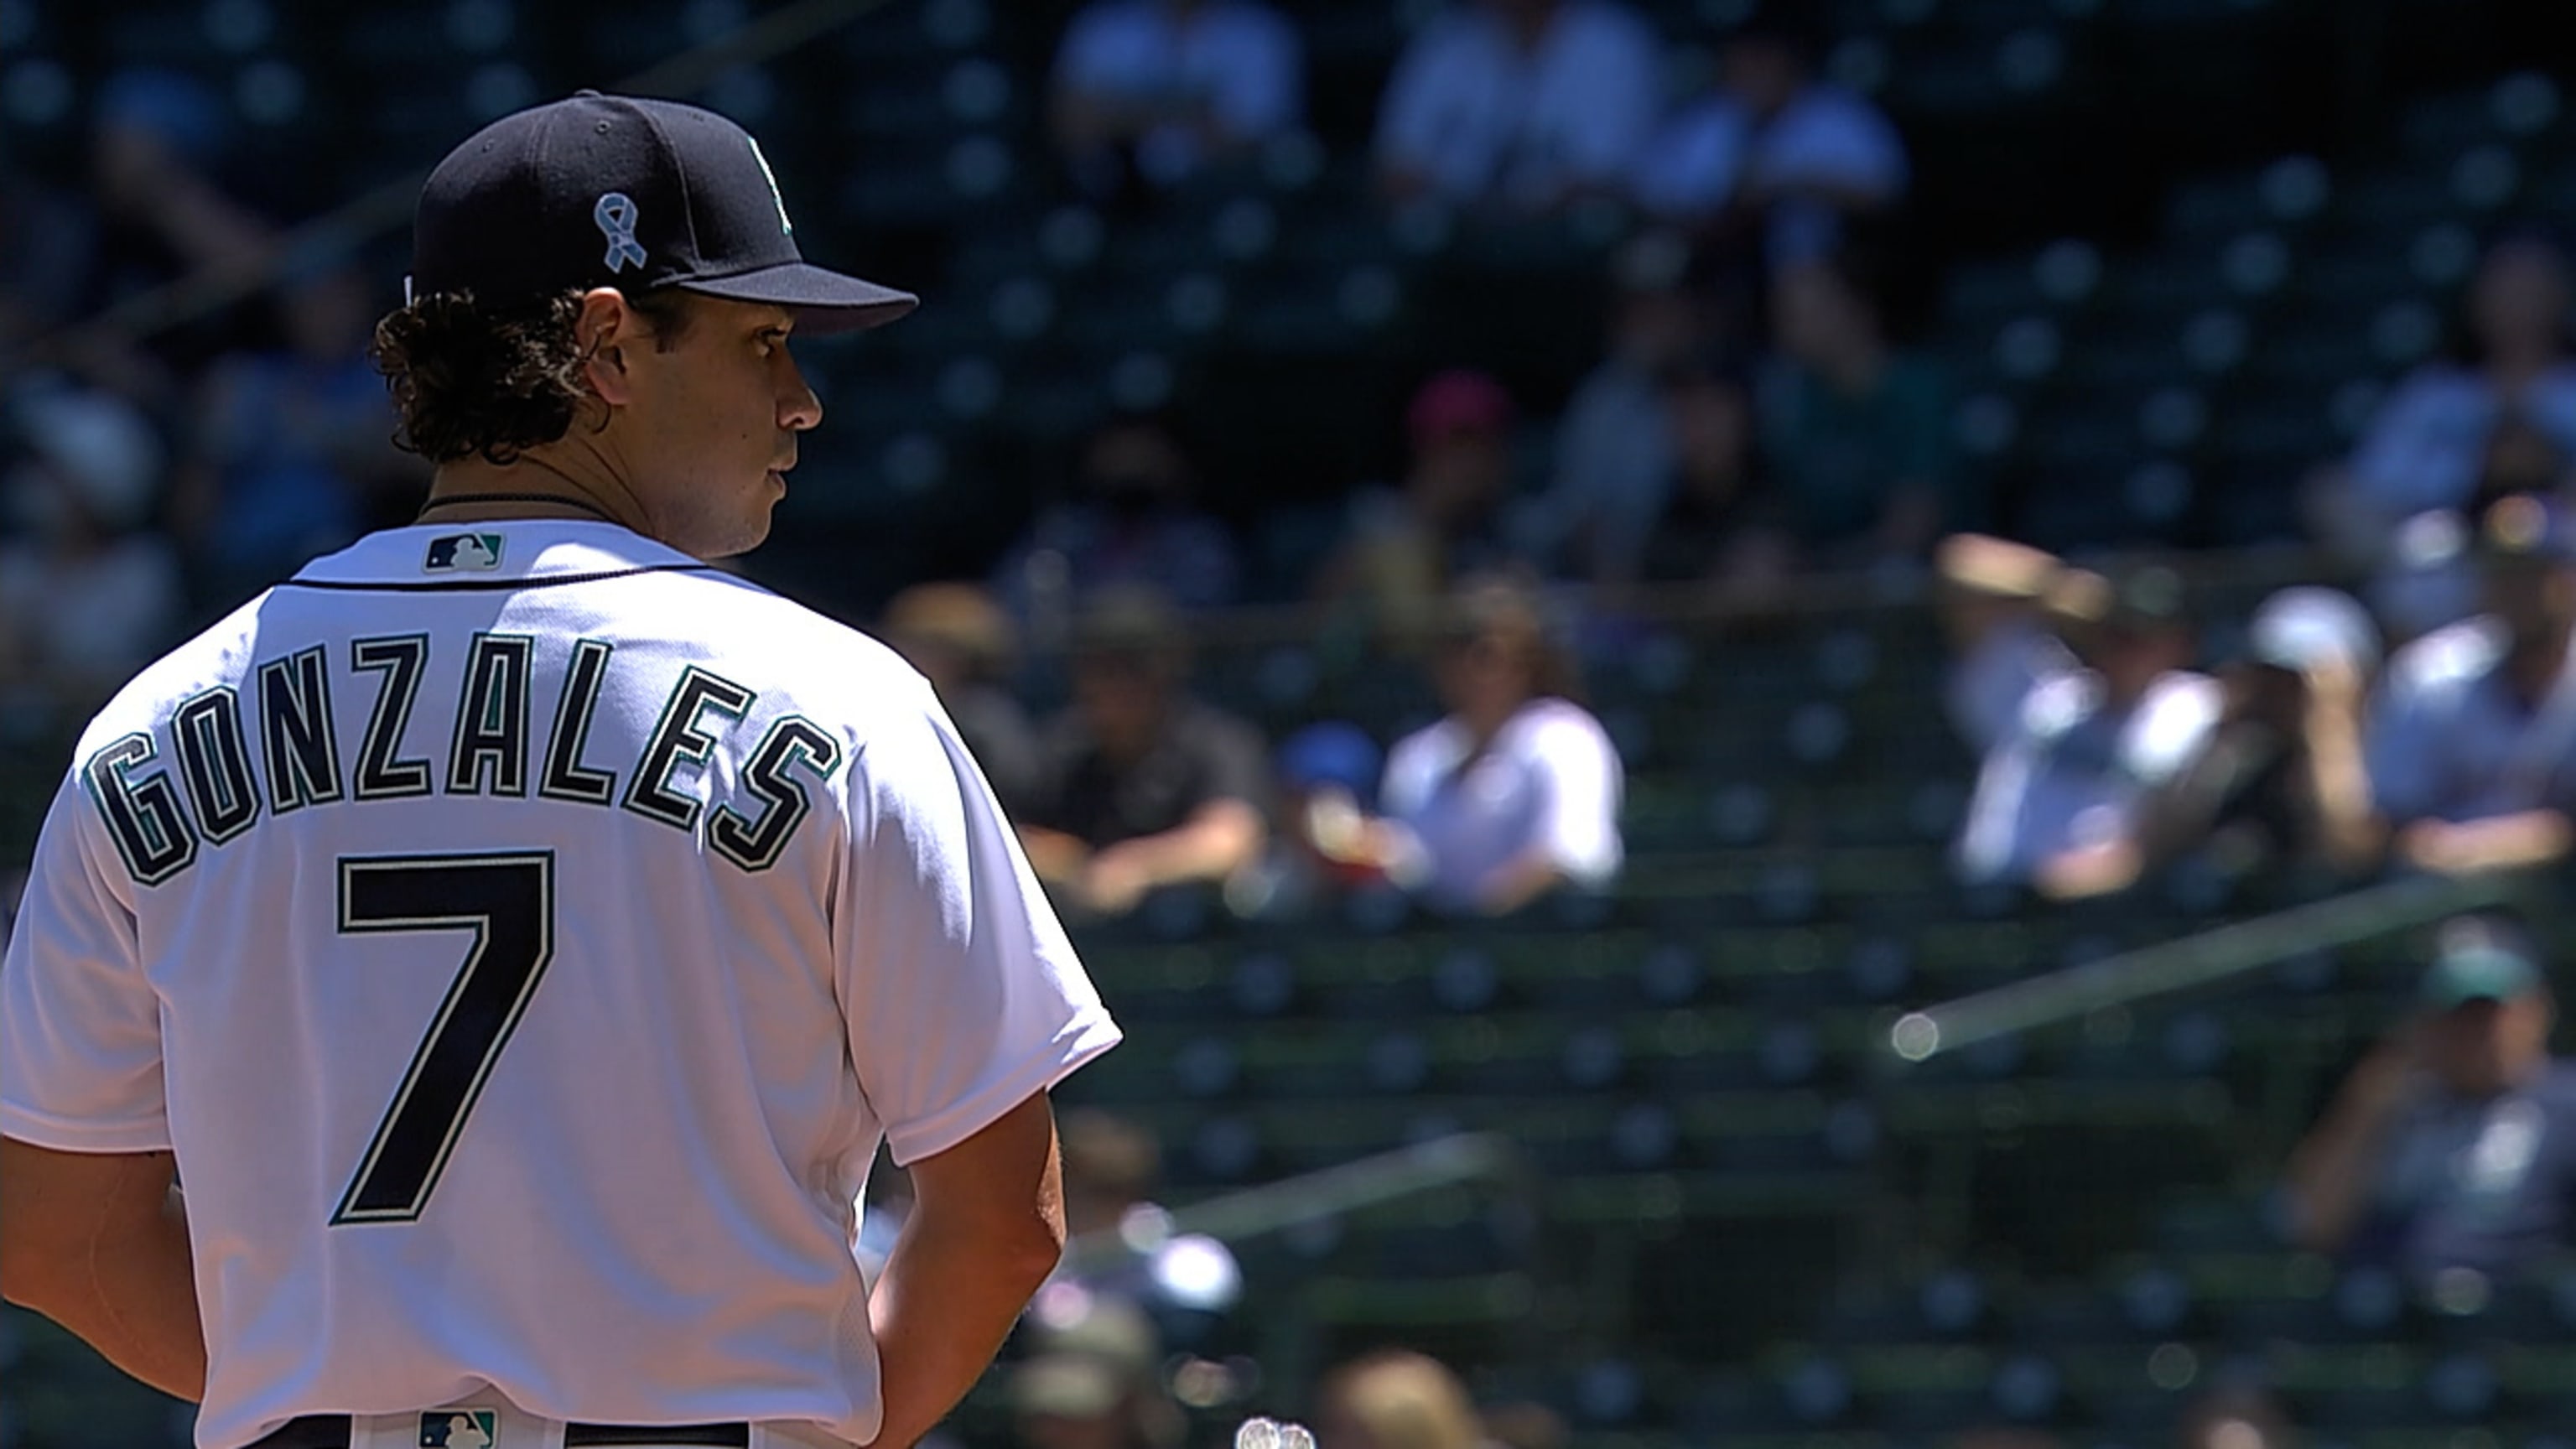 Gonzales ends 8-start skid, Mariners beat Márquez, Rockies - The